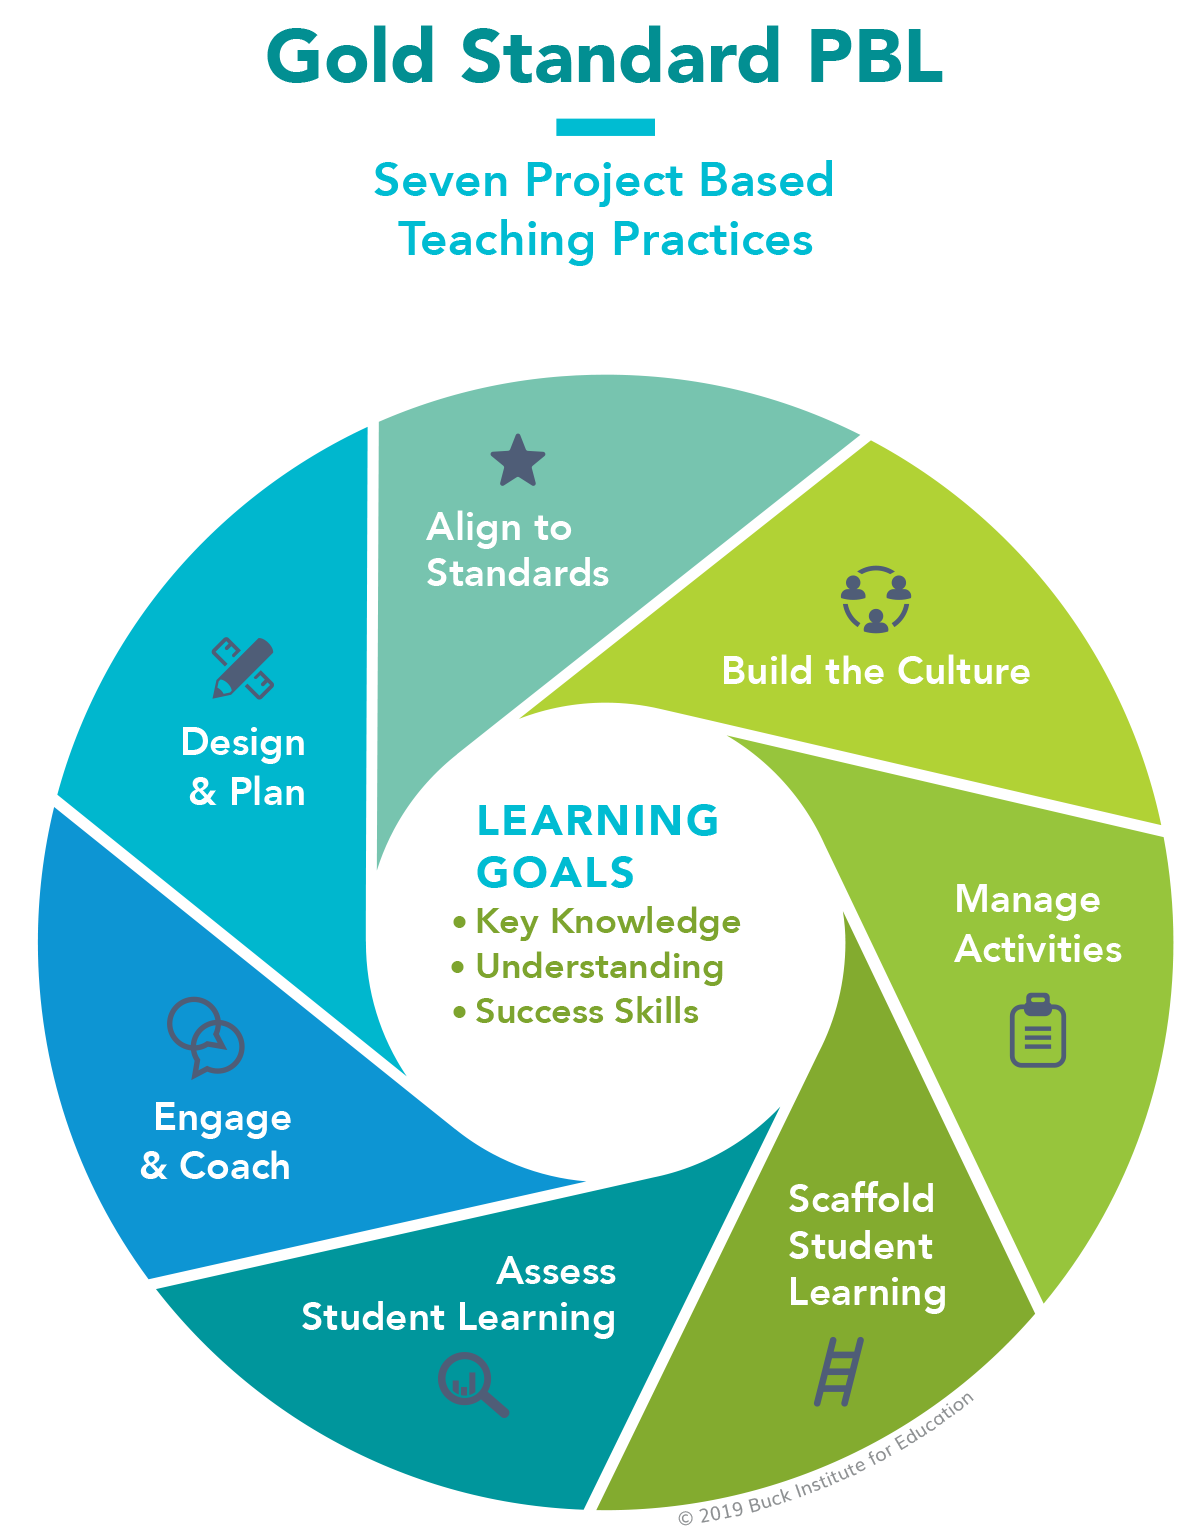 Gold Standard PBL. Seven Project Based Teaching Practices. Wheel illustration has icons for each of the elements, as outlined below. At center of wheels is Learning Goals – Key Knowledge, Understanding, and Success Skills.